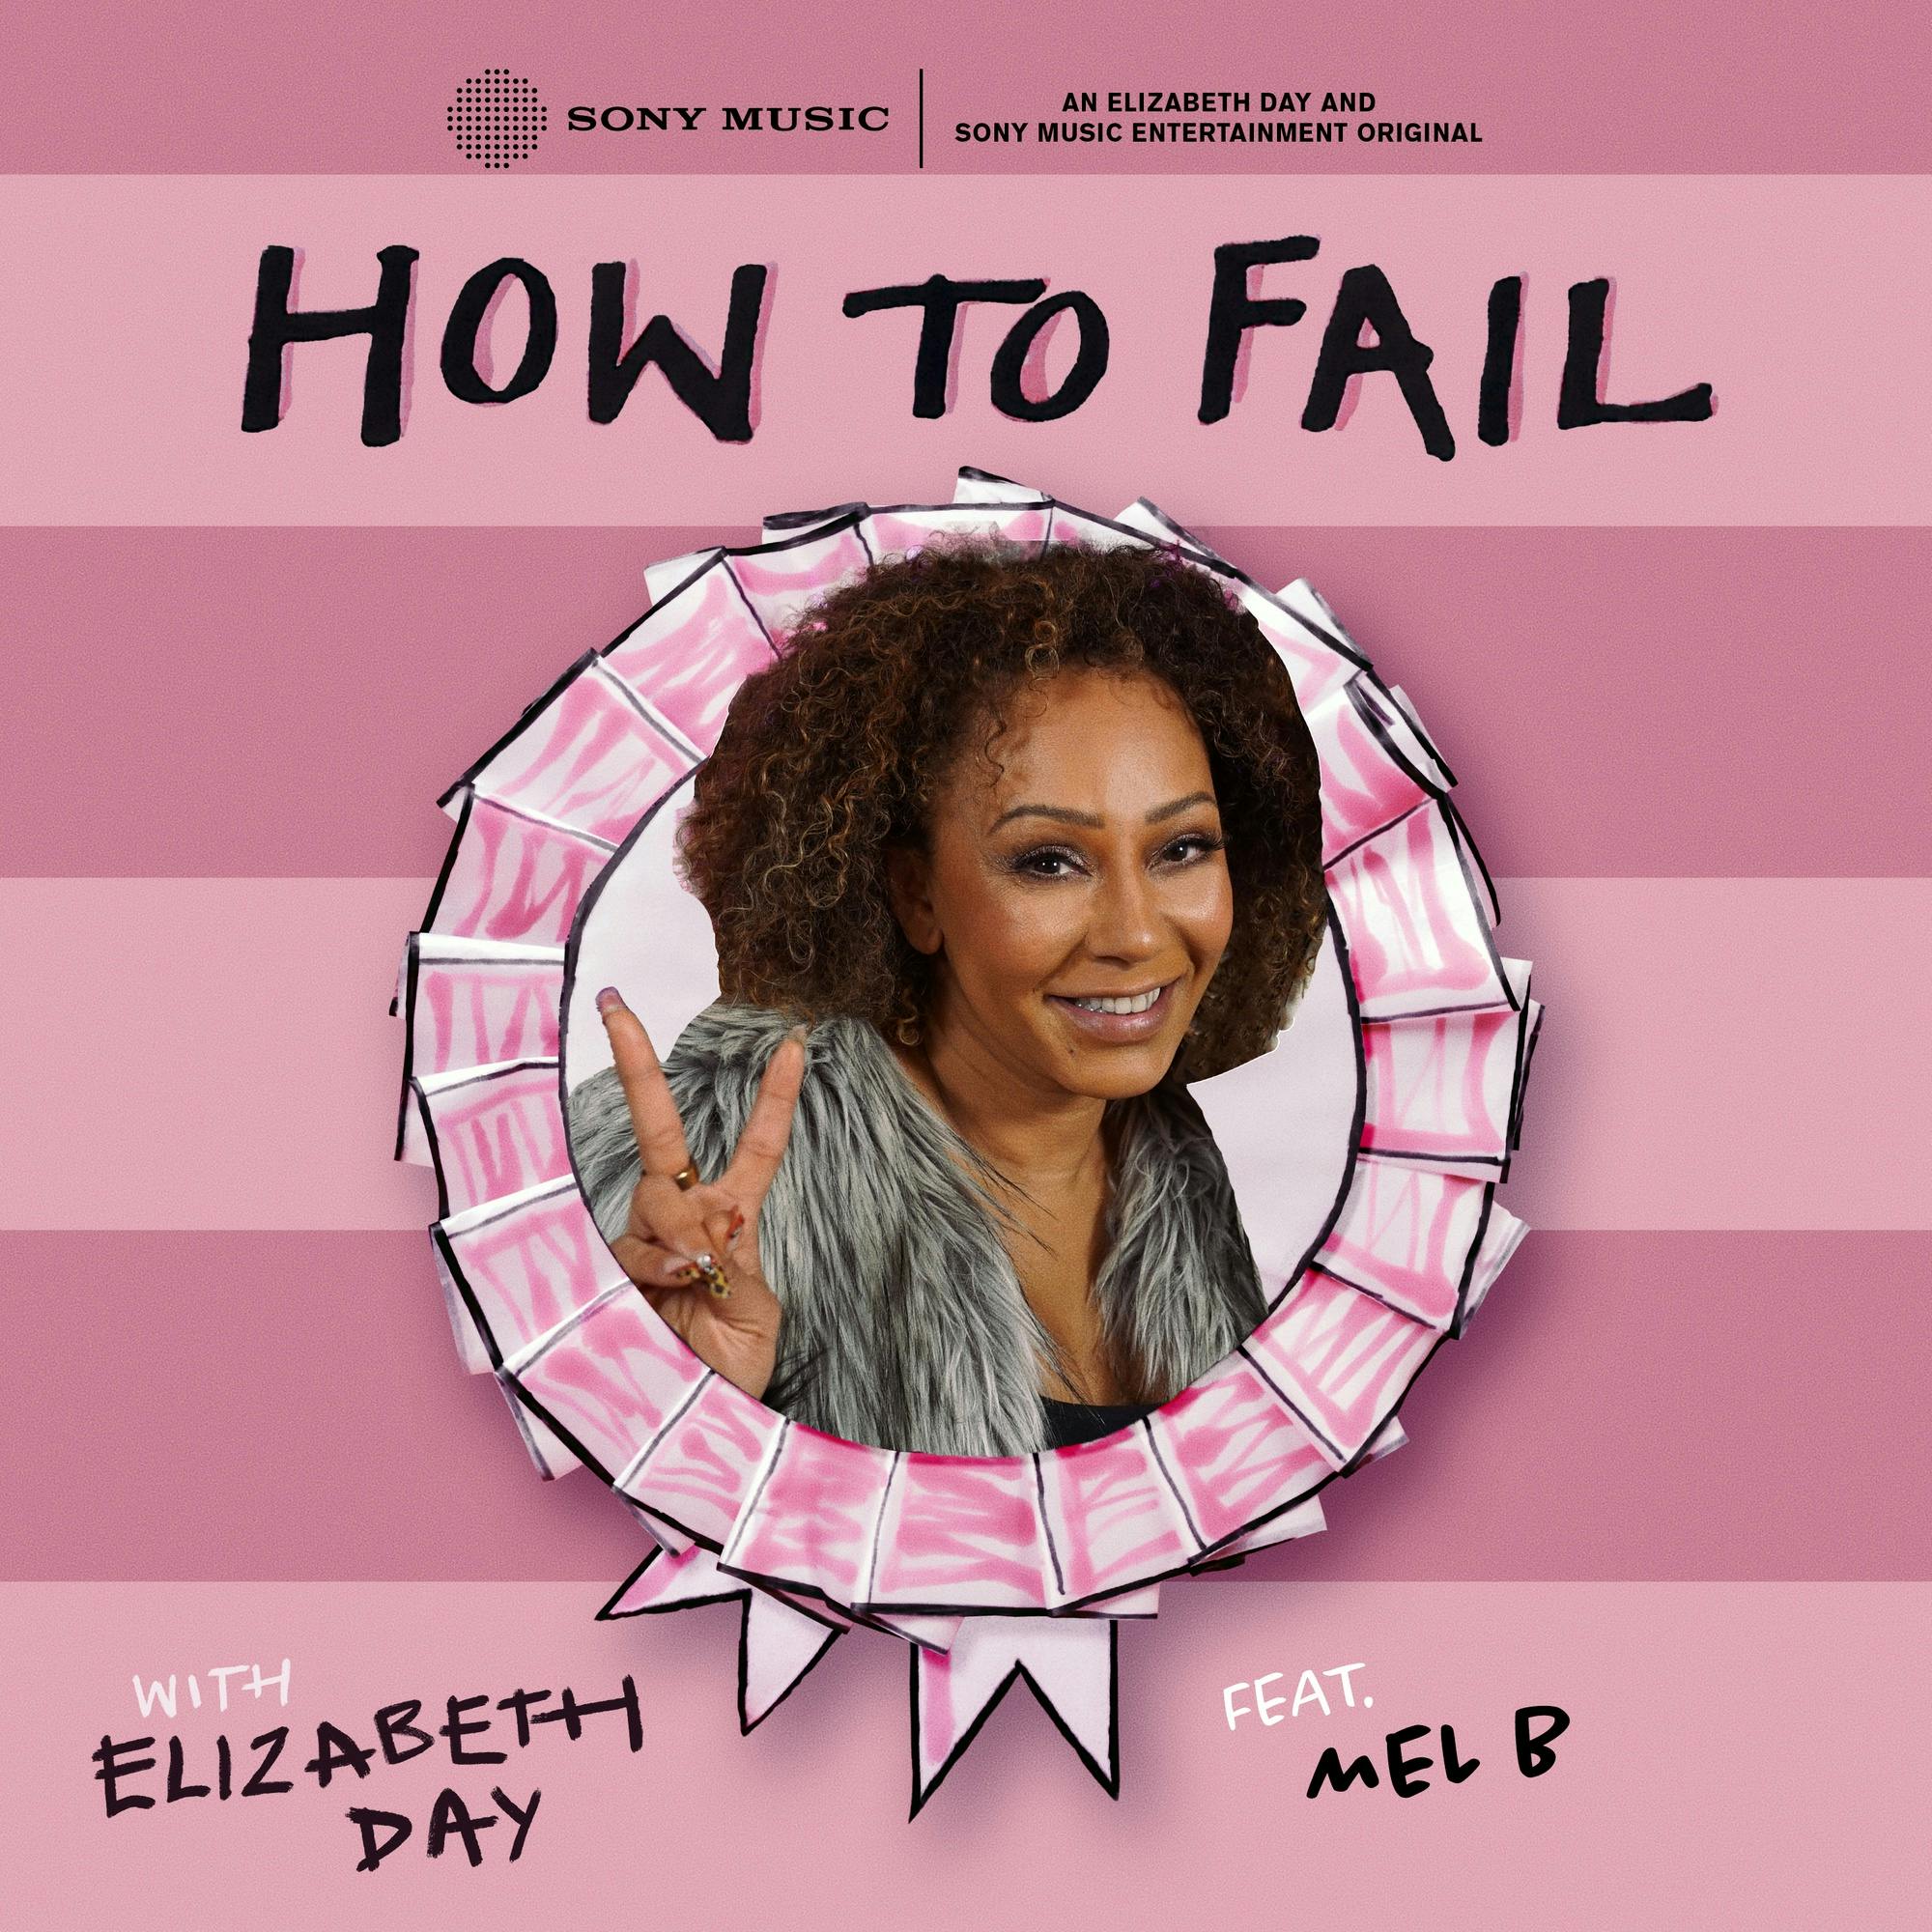 S20, Ep6 Mel B - ‘I was a Spice Girl shouting about girl power, but I was girl powerless.’